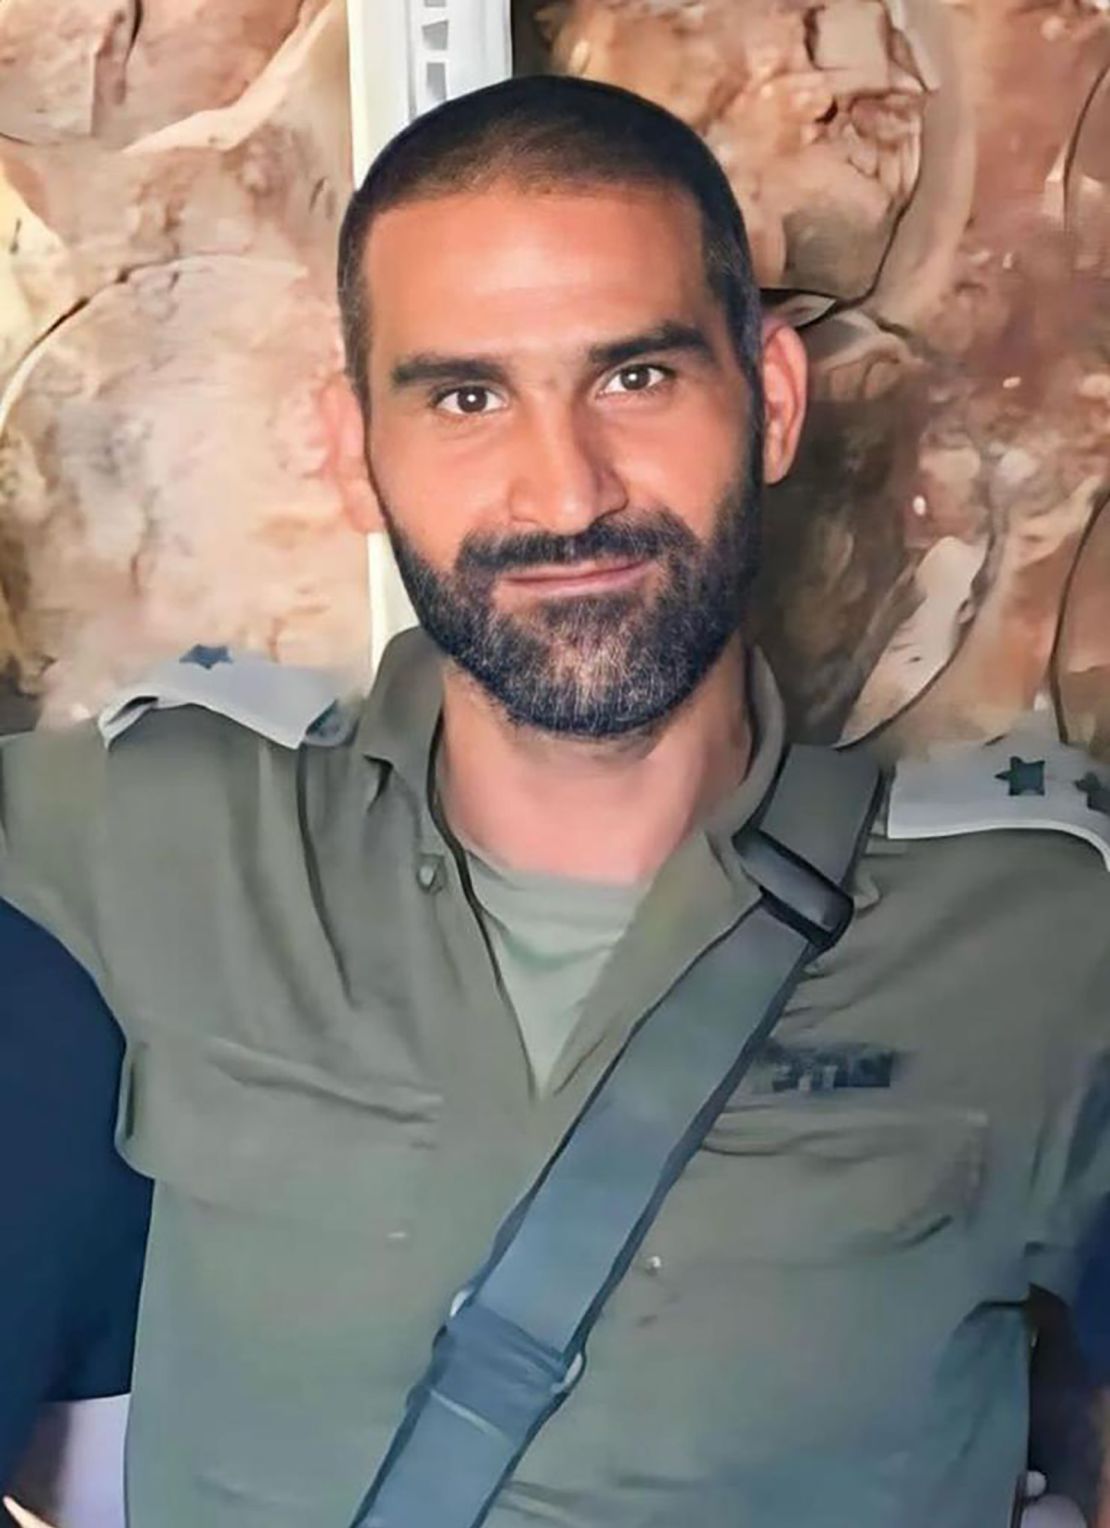 Alim Abdallah was killed in action on Israel's border with Lebanon.